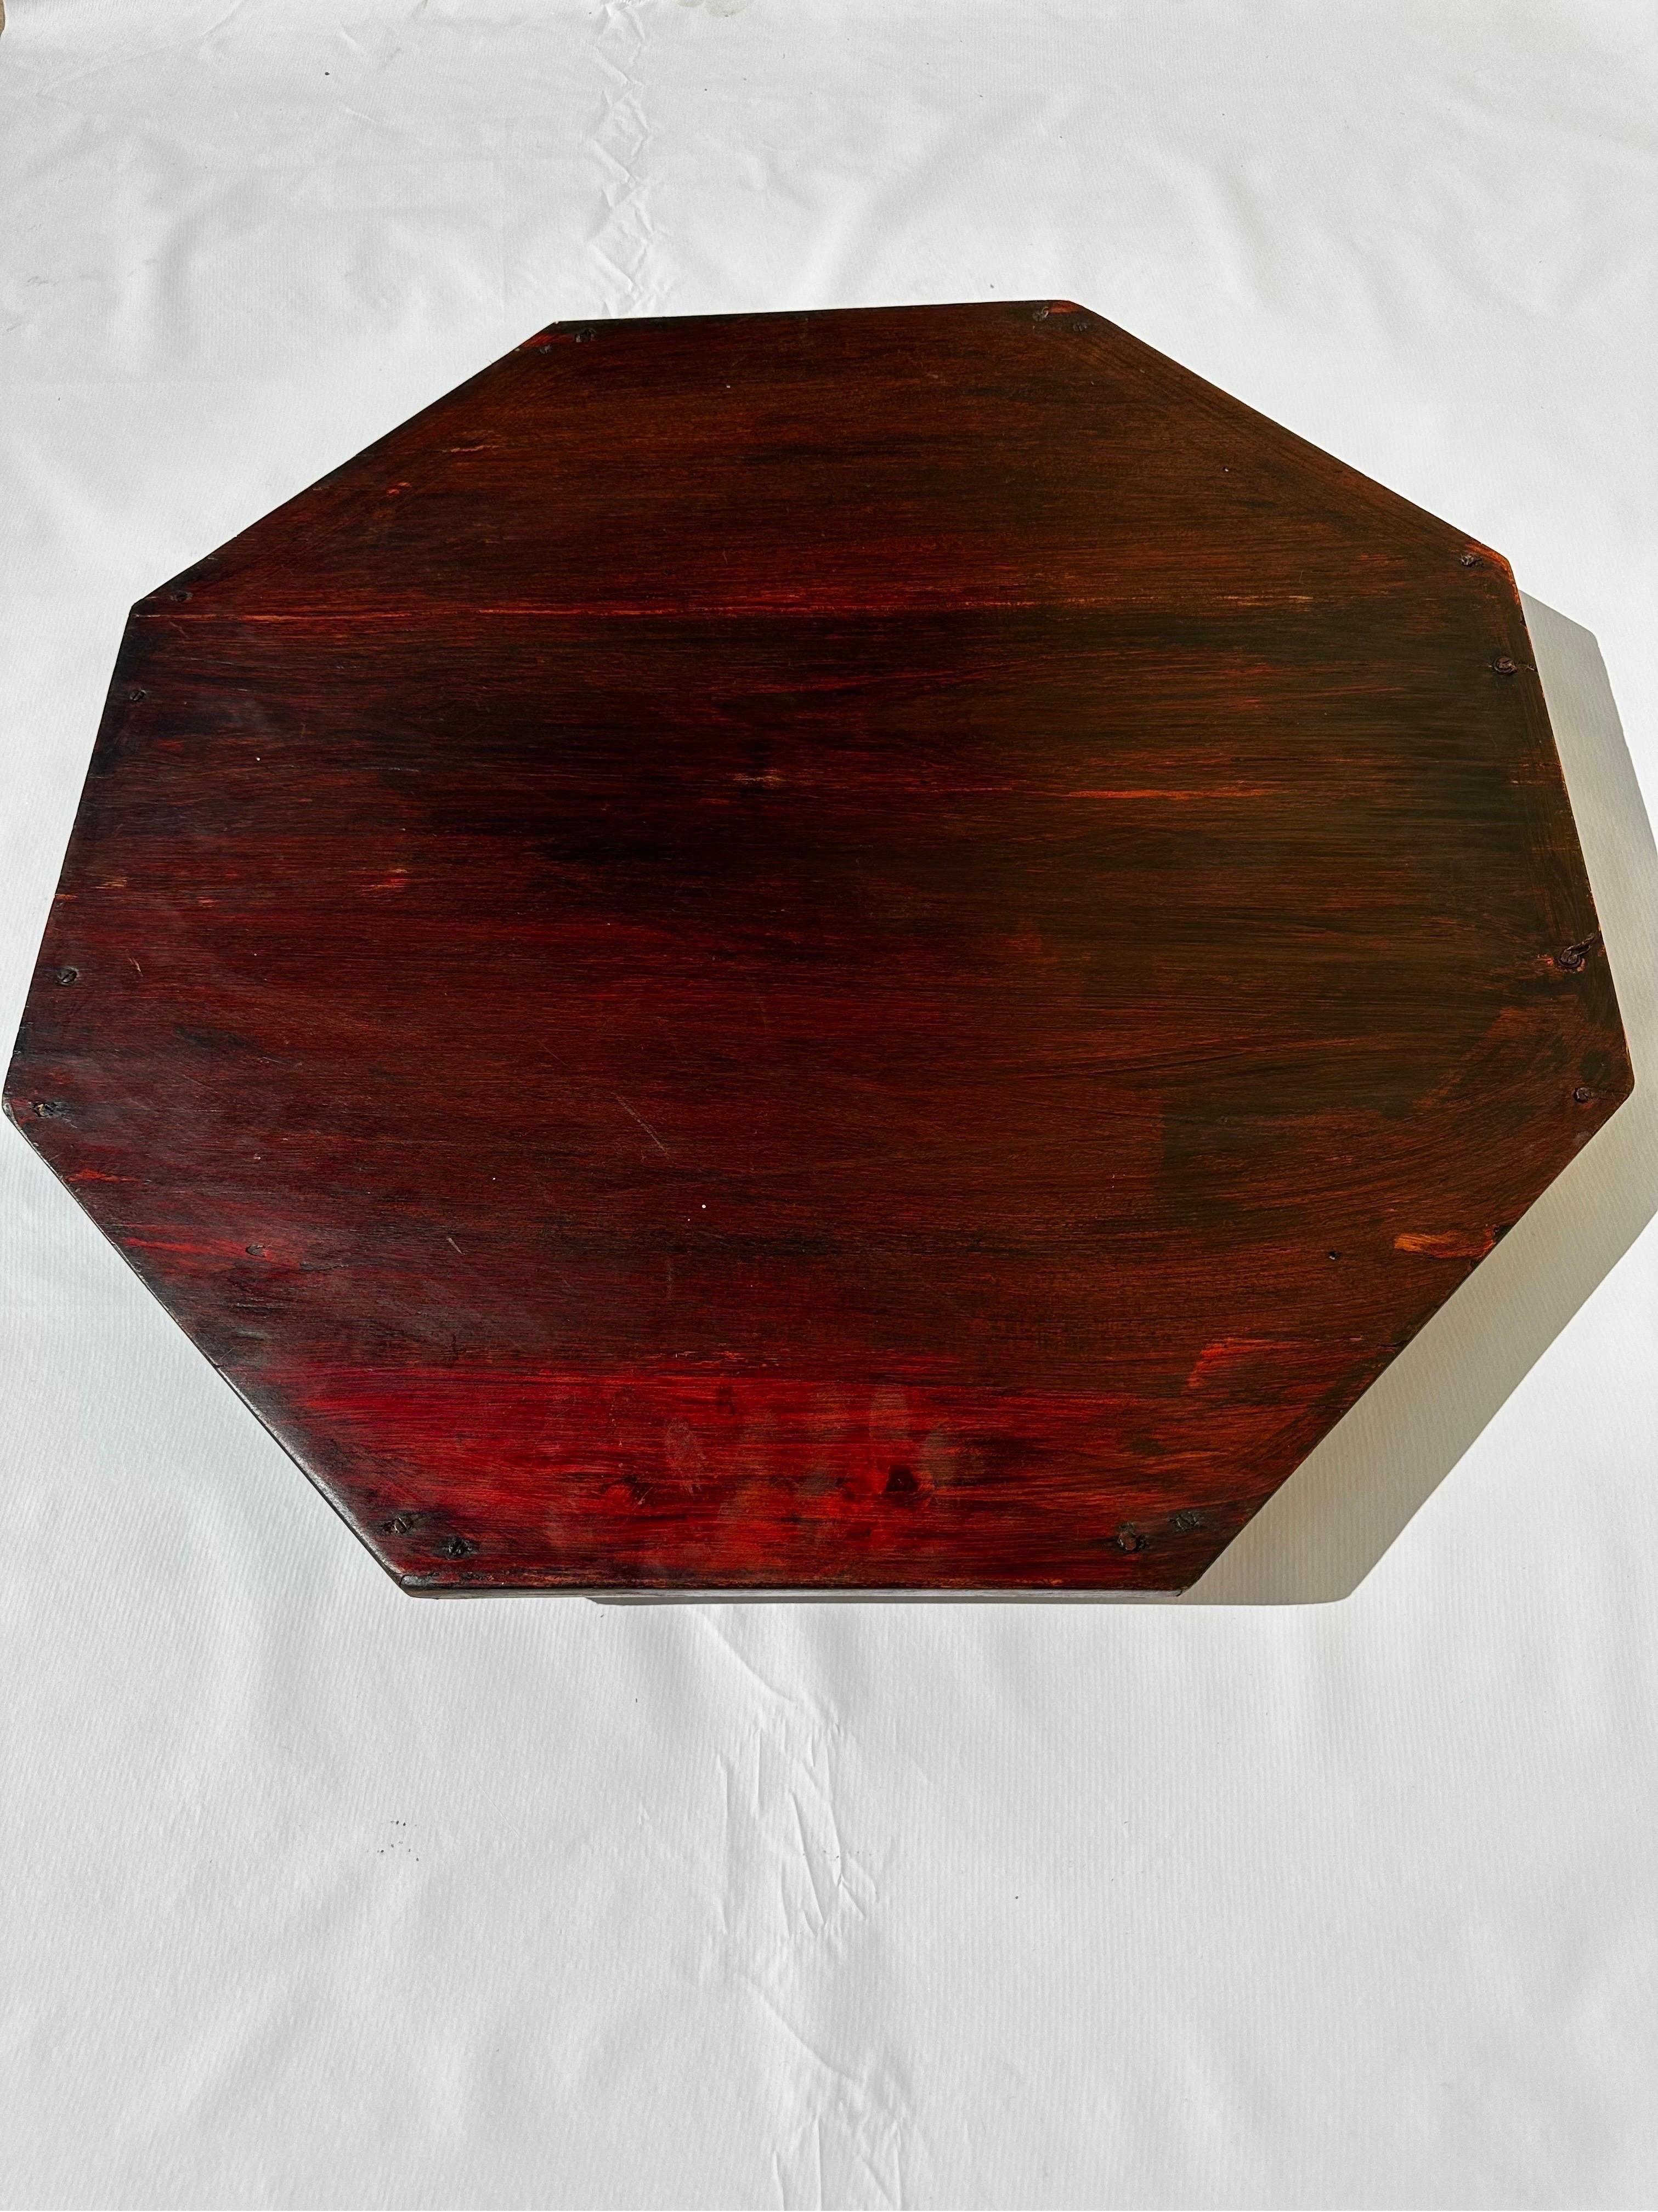 Brazilian Midcentury Jacarandá Rosewood and Brass Serving Tray, 1960s For Sale 7